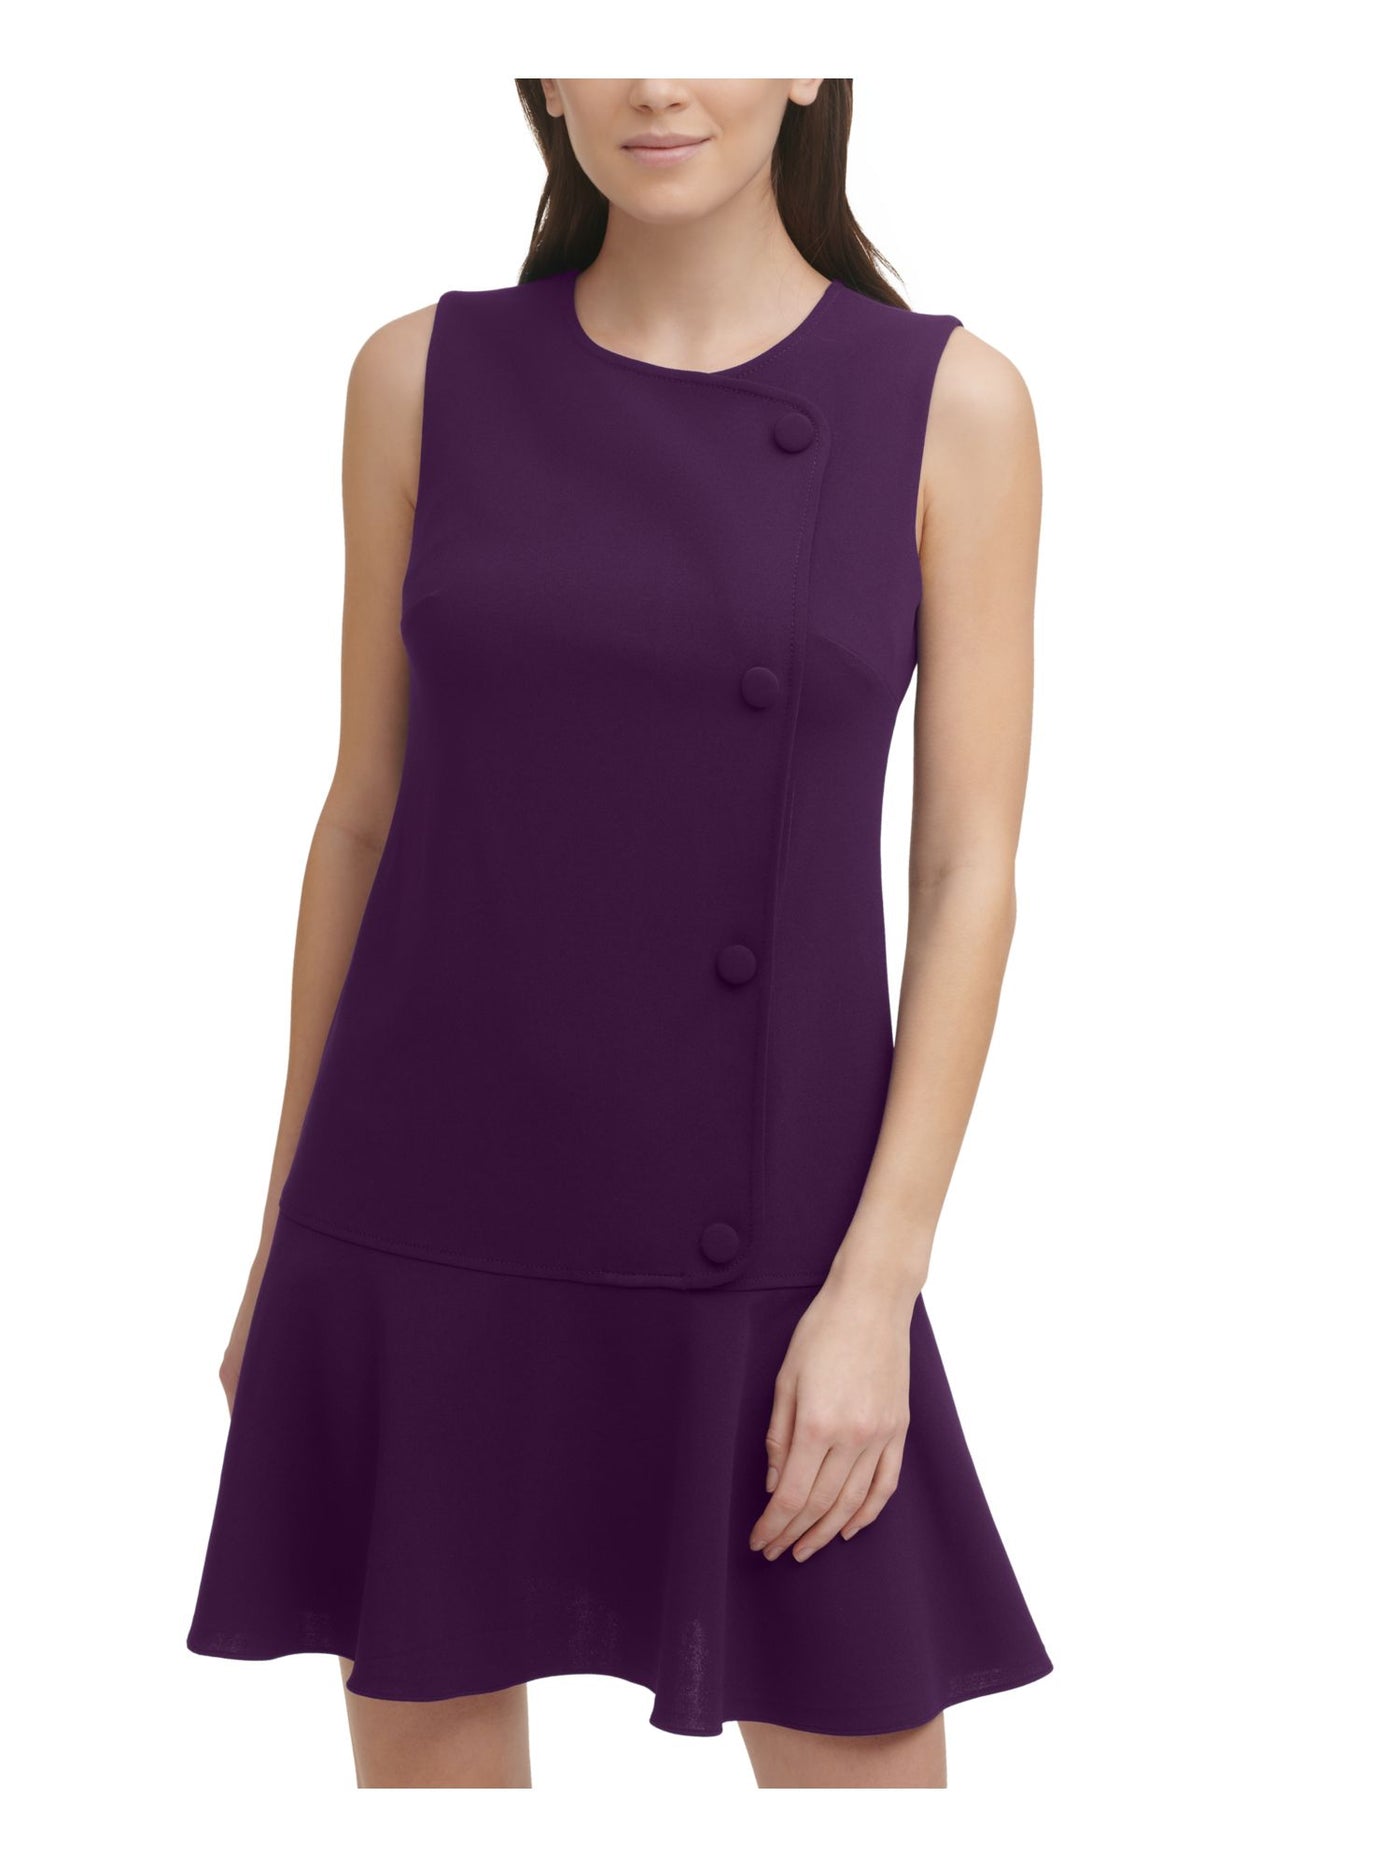 DKNY Womens Purple Stretch Zippered Fitted Faux Button Darted Sleeveless Round Neck Short Wear To Work Drop Waist Dress 16